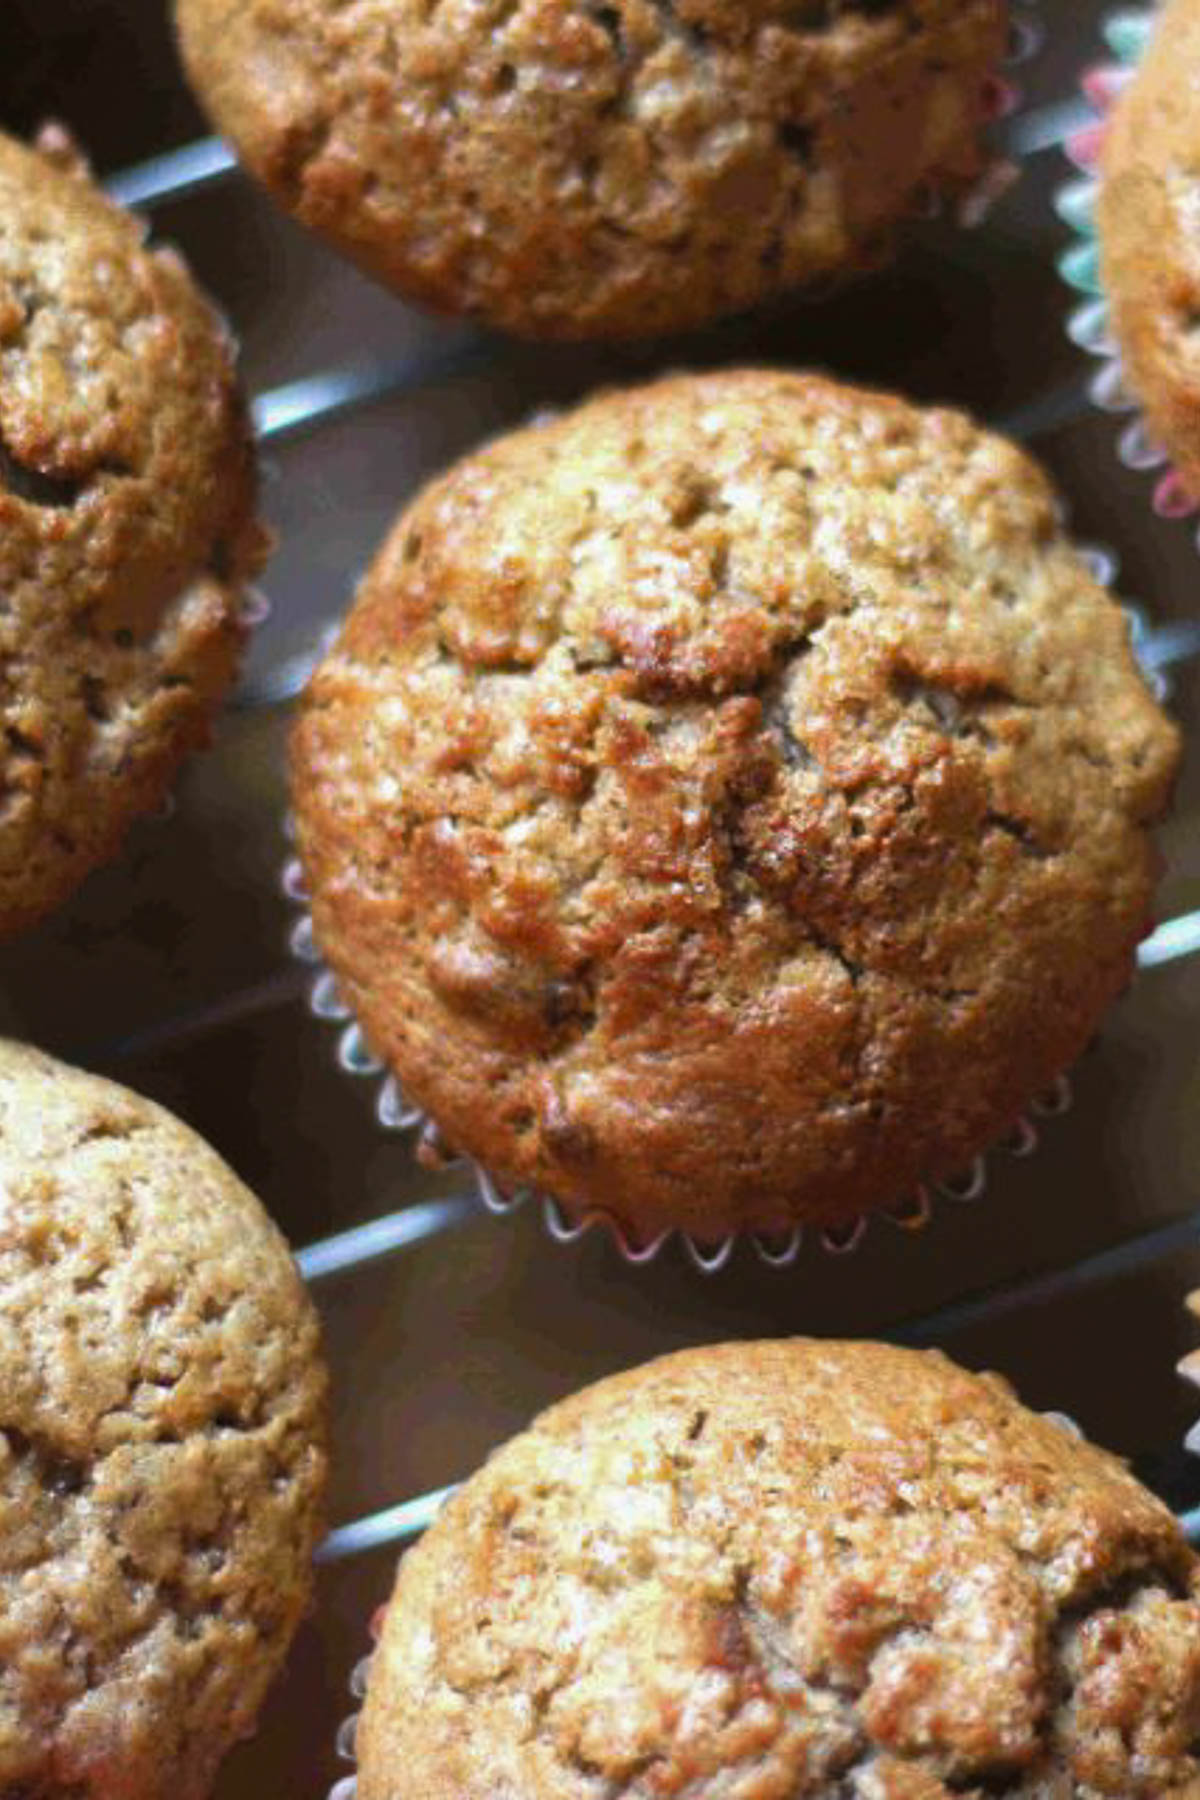 Apple and cinnamon muffins from Cooking with my Kids blog.